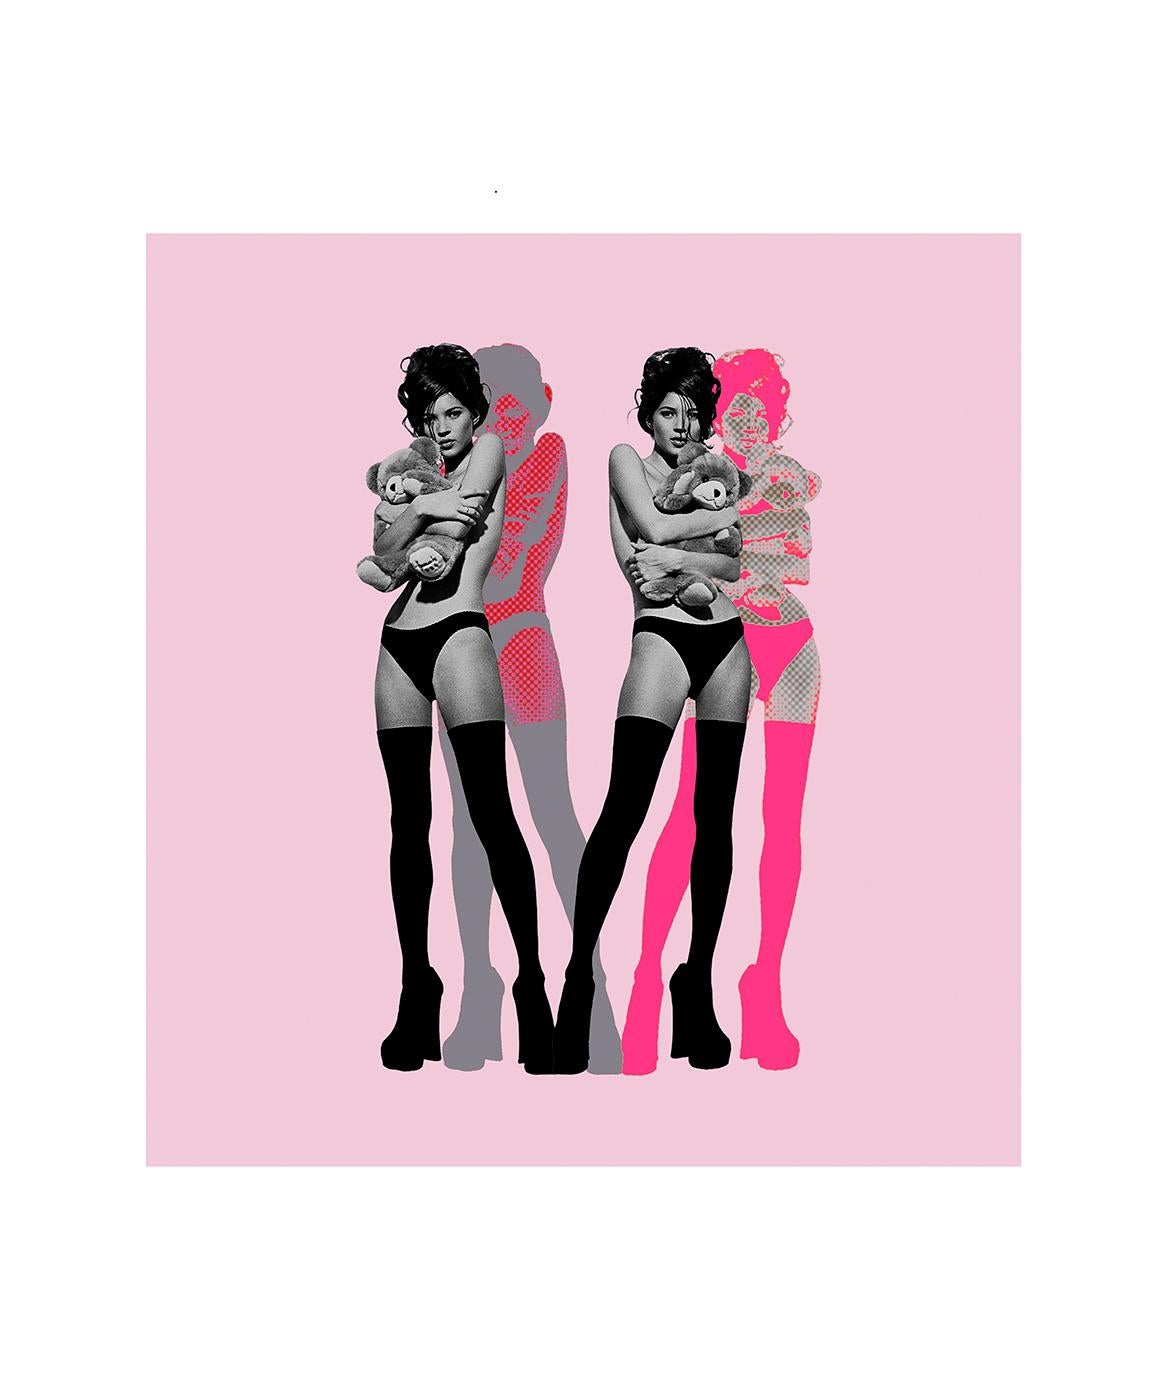 "Twin Kate Moss on Pink" Photography 40 x 36.5 in Edition of 25 by Kate Garner

Hahnemuhle fine art archival paper

Kate Garner: Seeker, Sage, and Preservationist of Identity

A thoughtful selection of Kate Garner’s most pivotal work, showing the